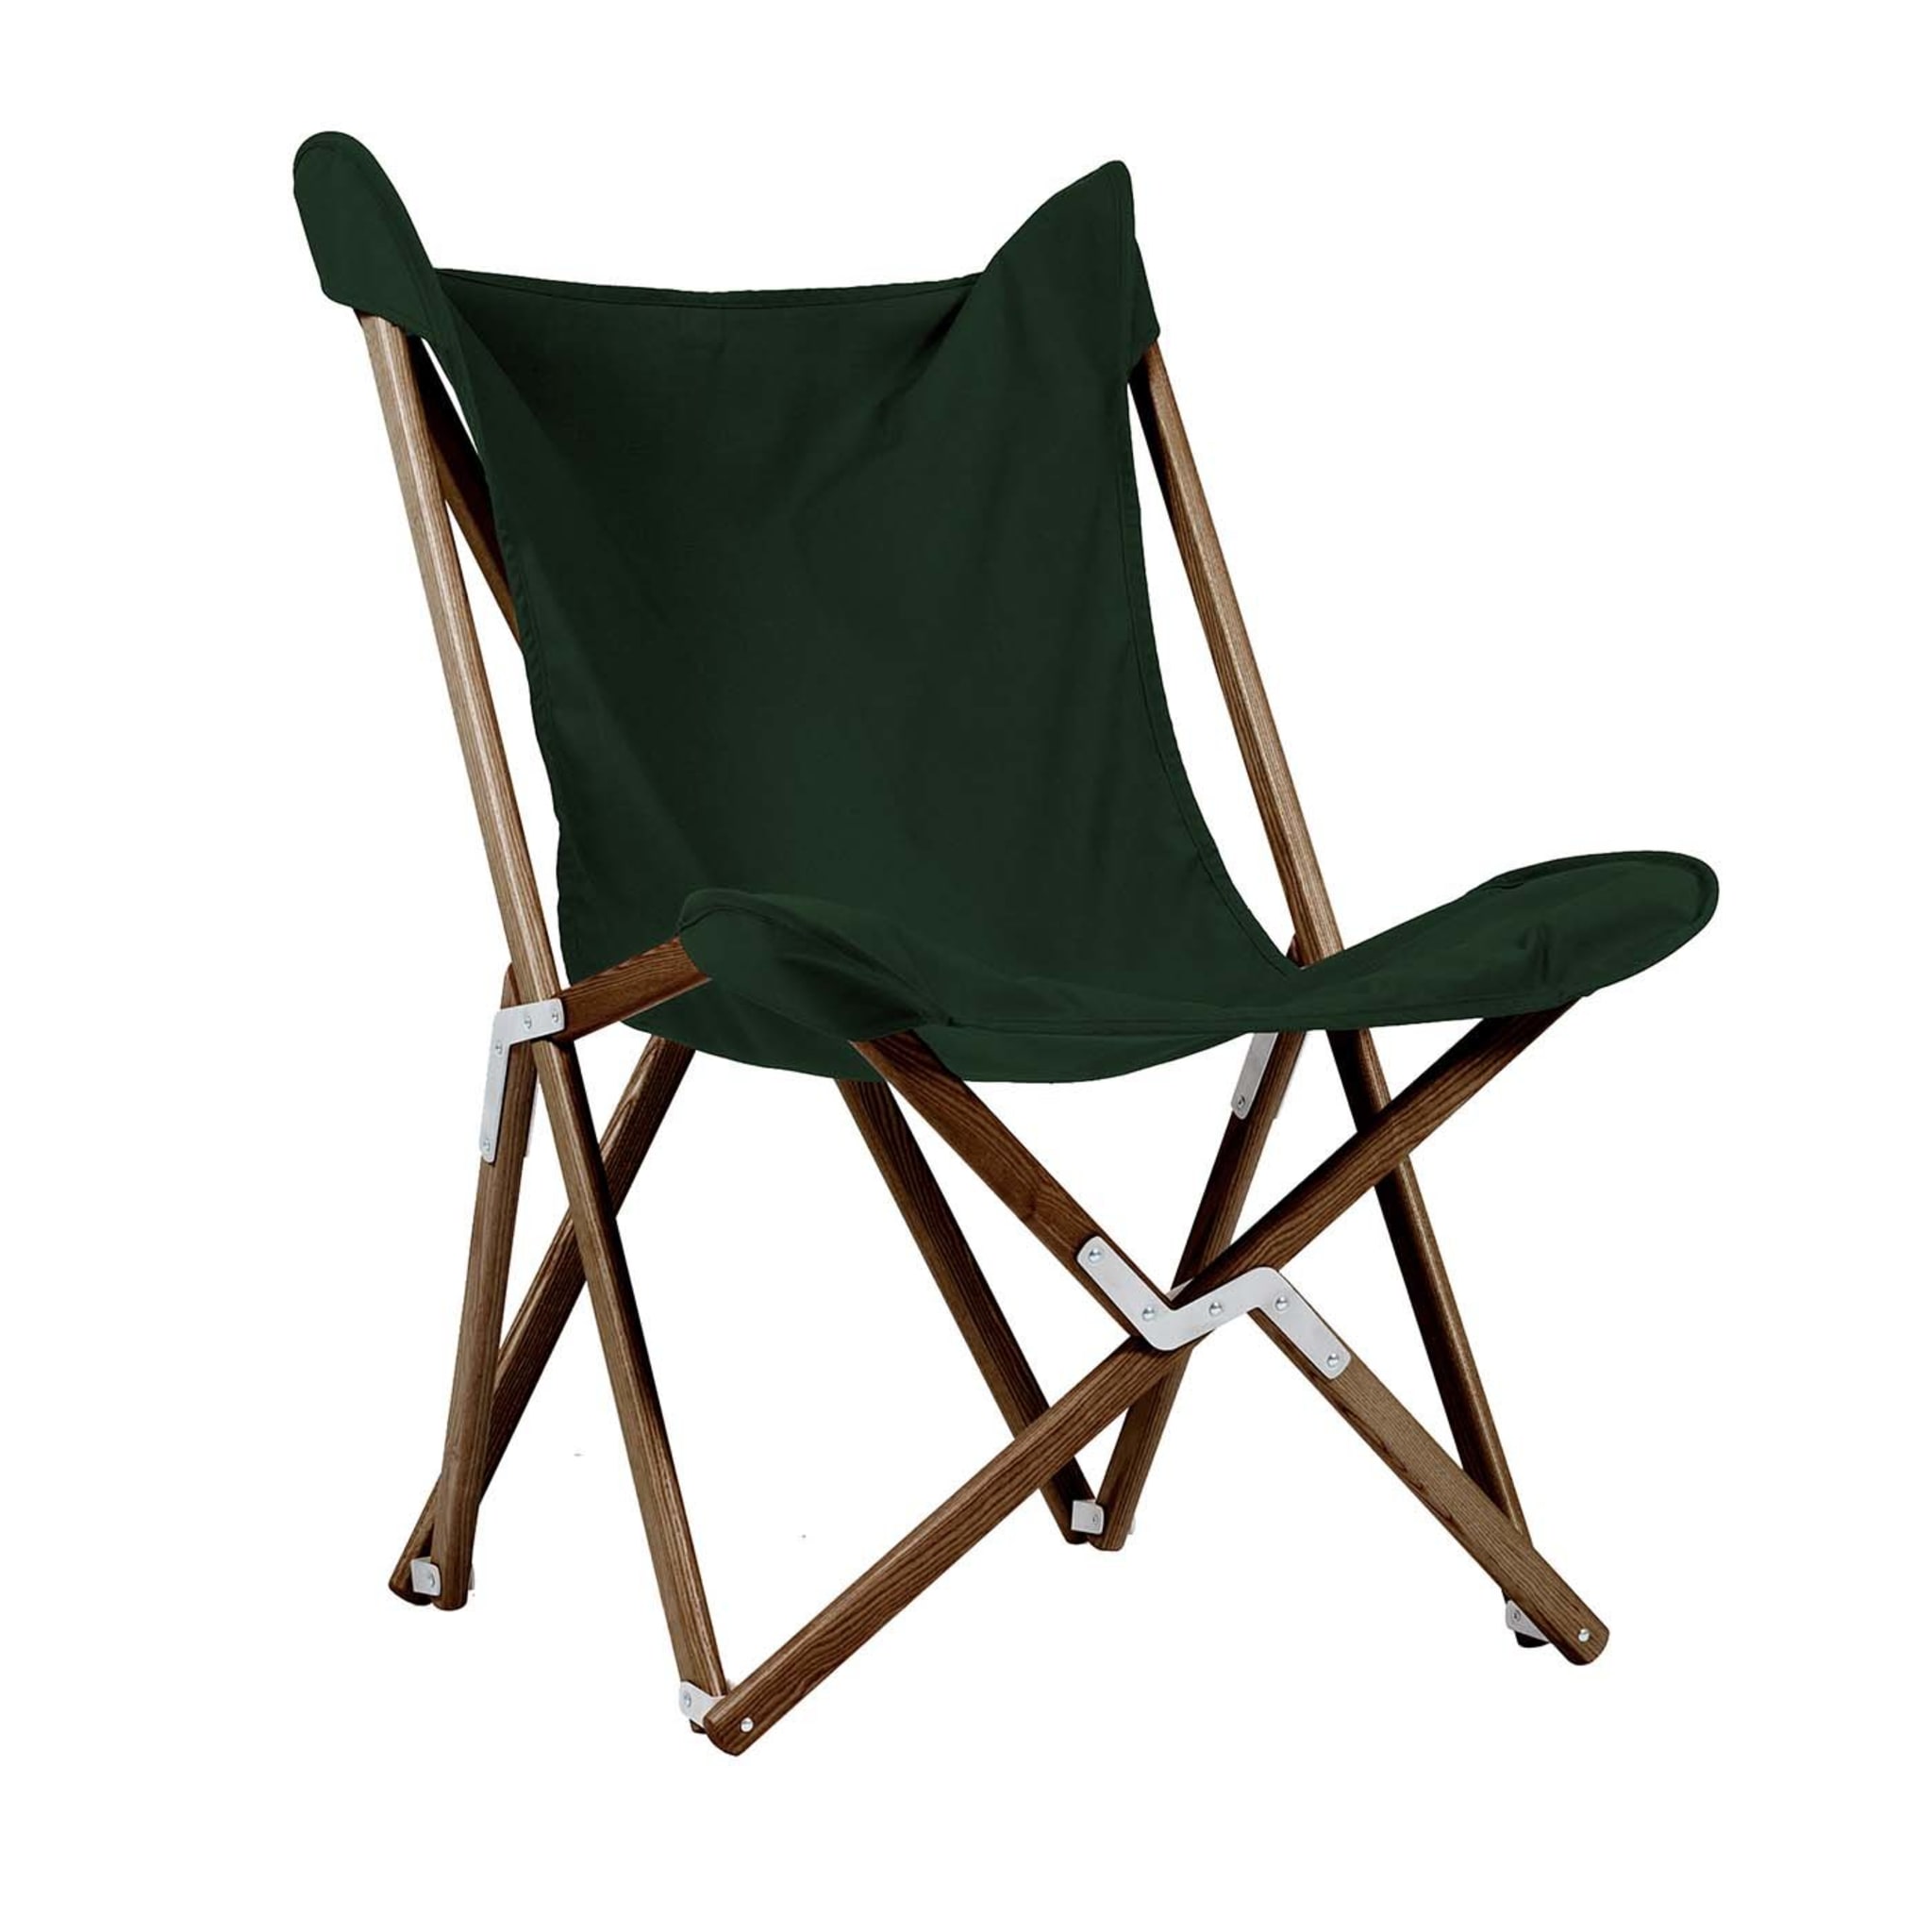 Tripolina Armchair in Forest Green - Main view